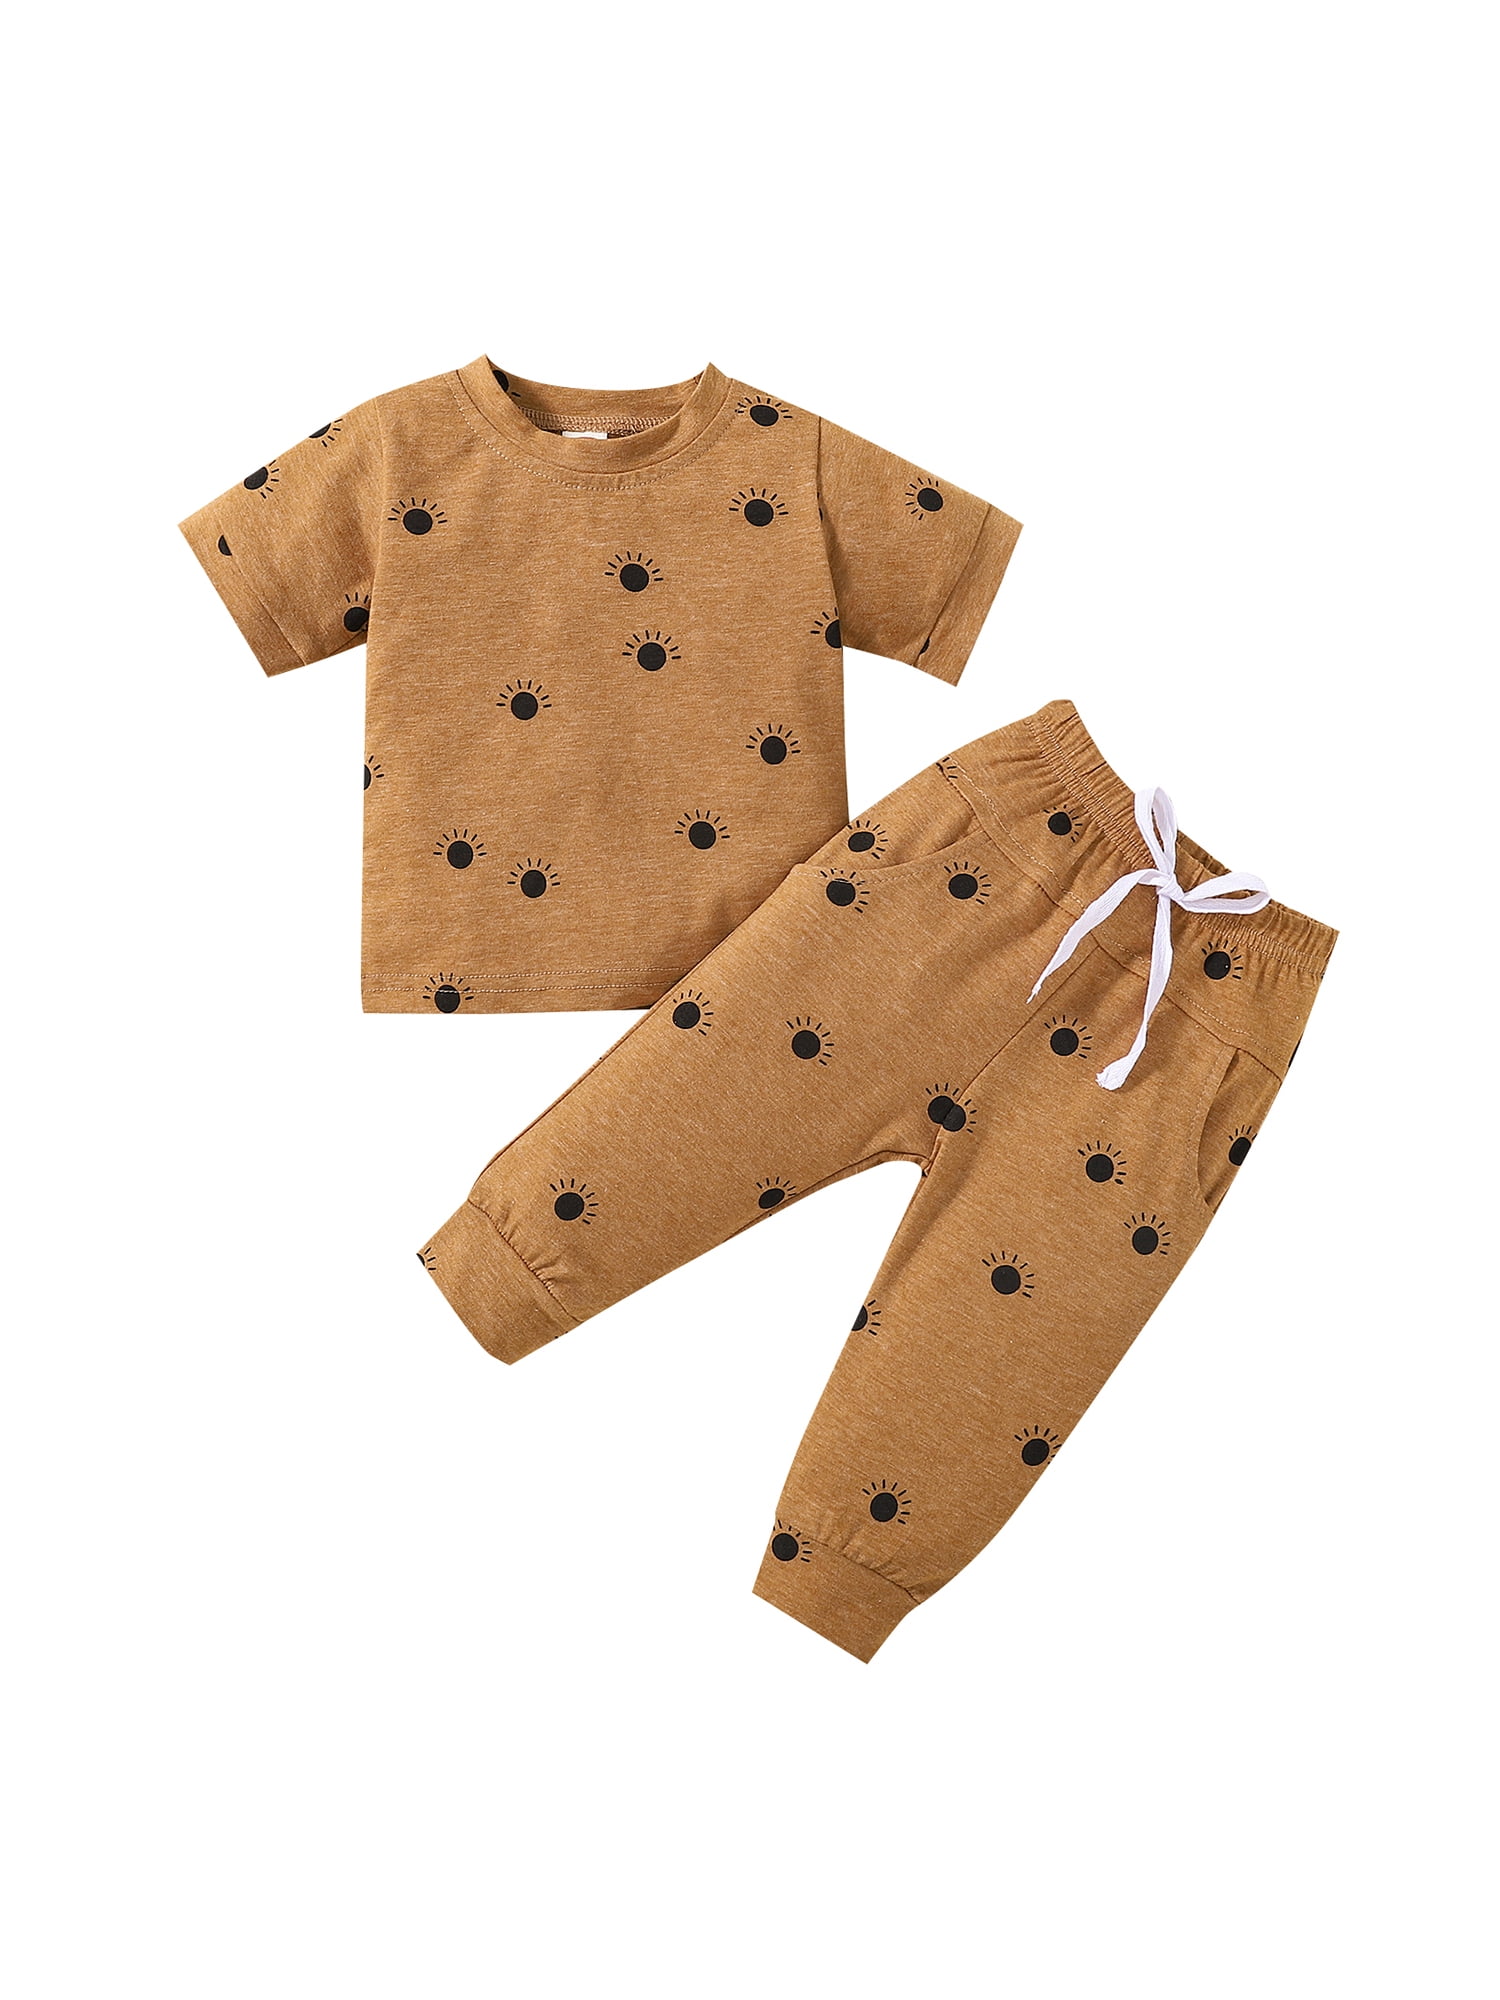 2pcs Toddler Baby Boys summer top Tee+short Pants Outfits Clothes Set star 